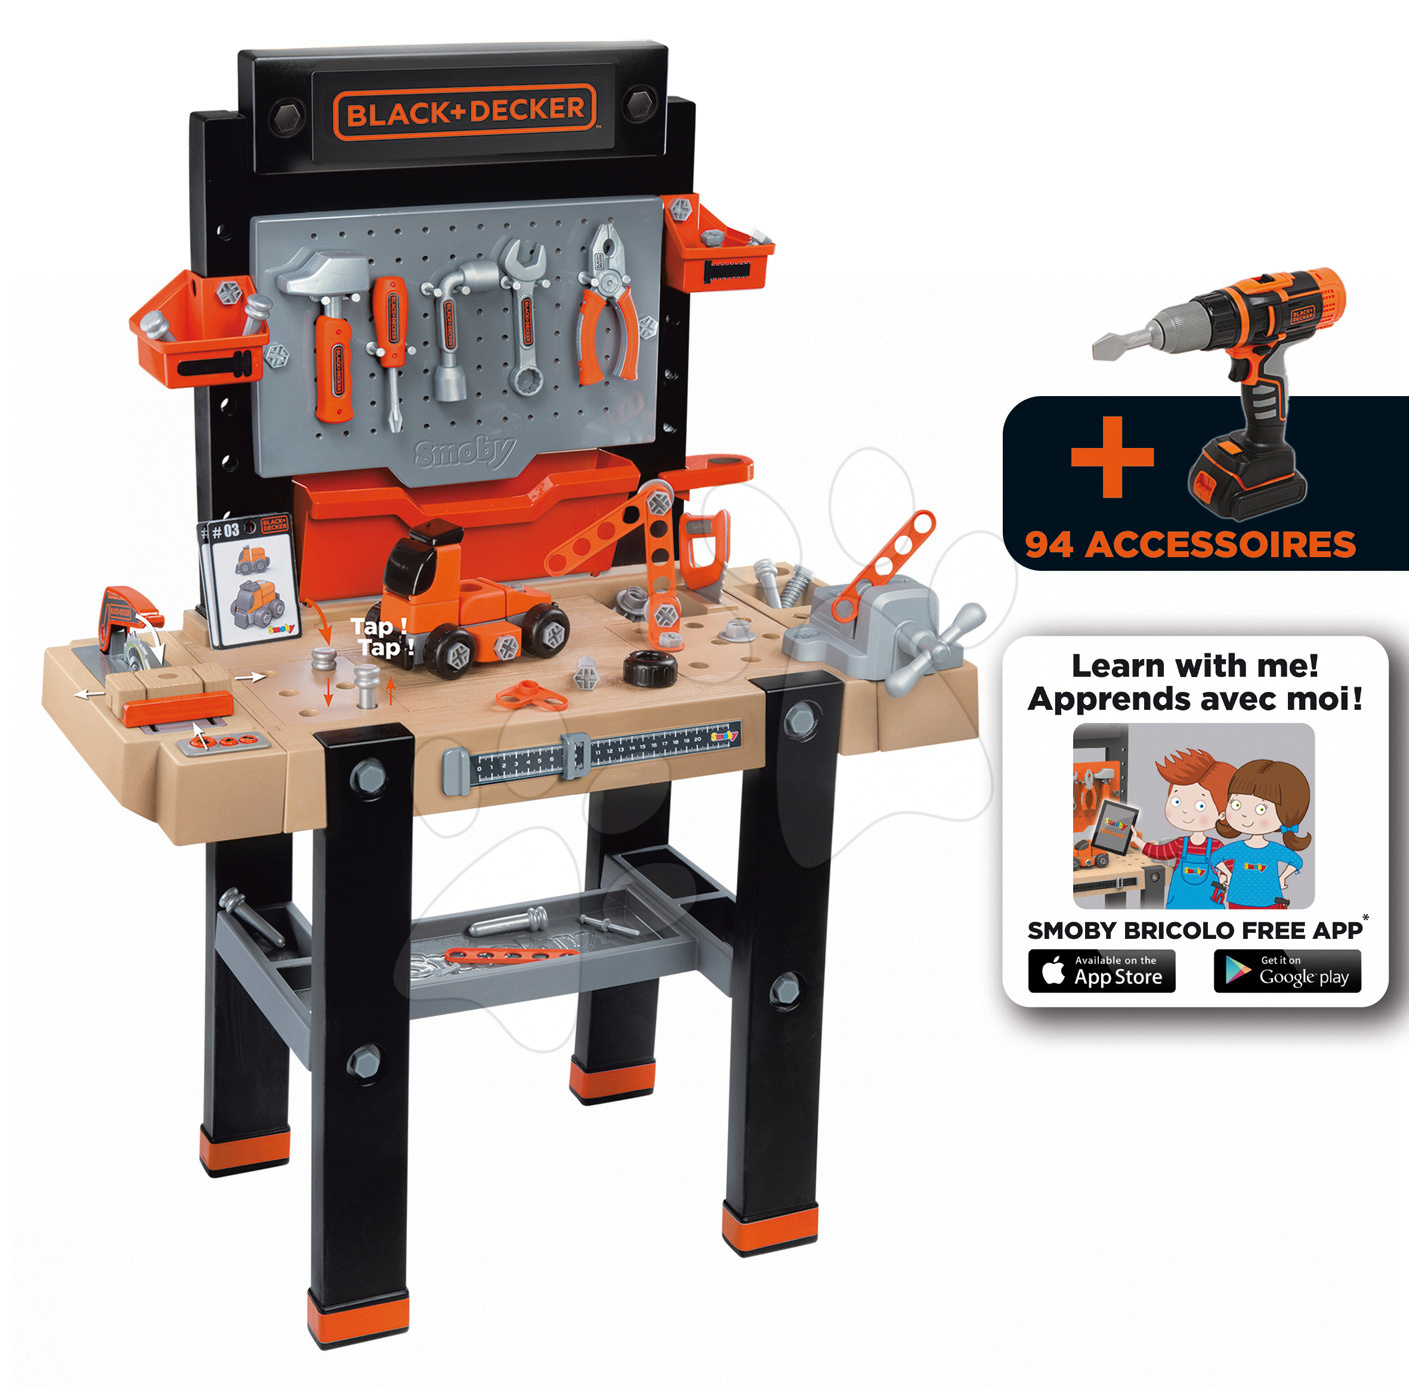 Black+Decker Smoby Workbench electronic with a drill, car to